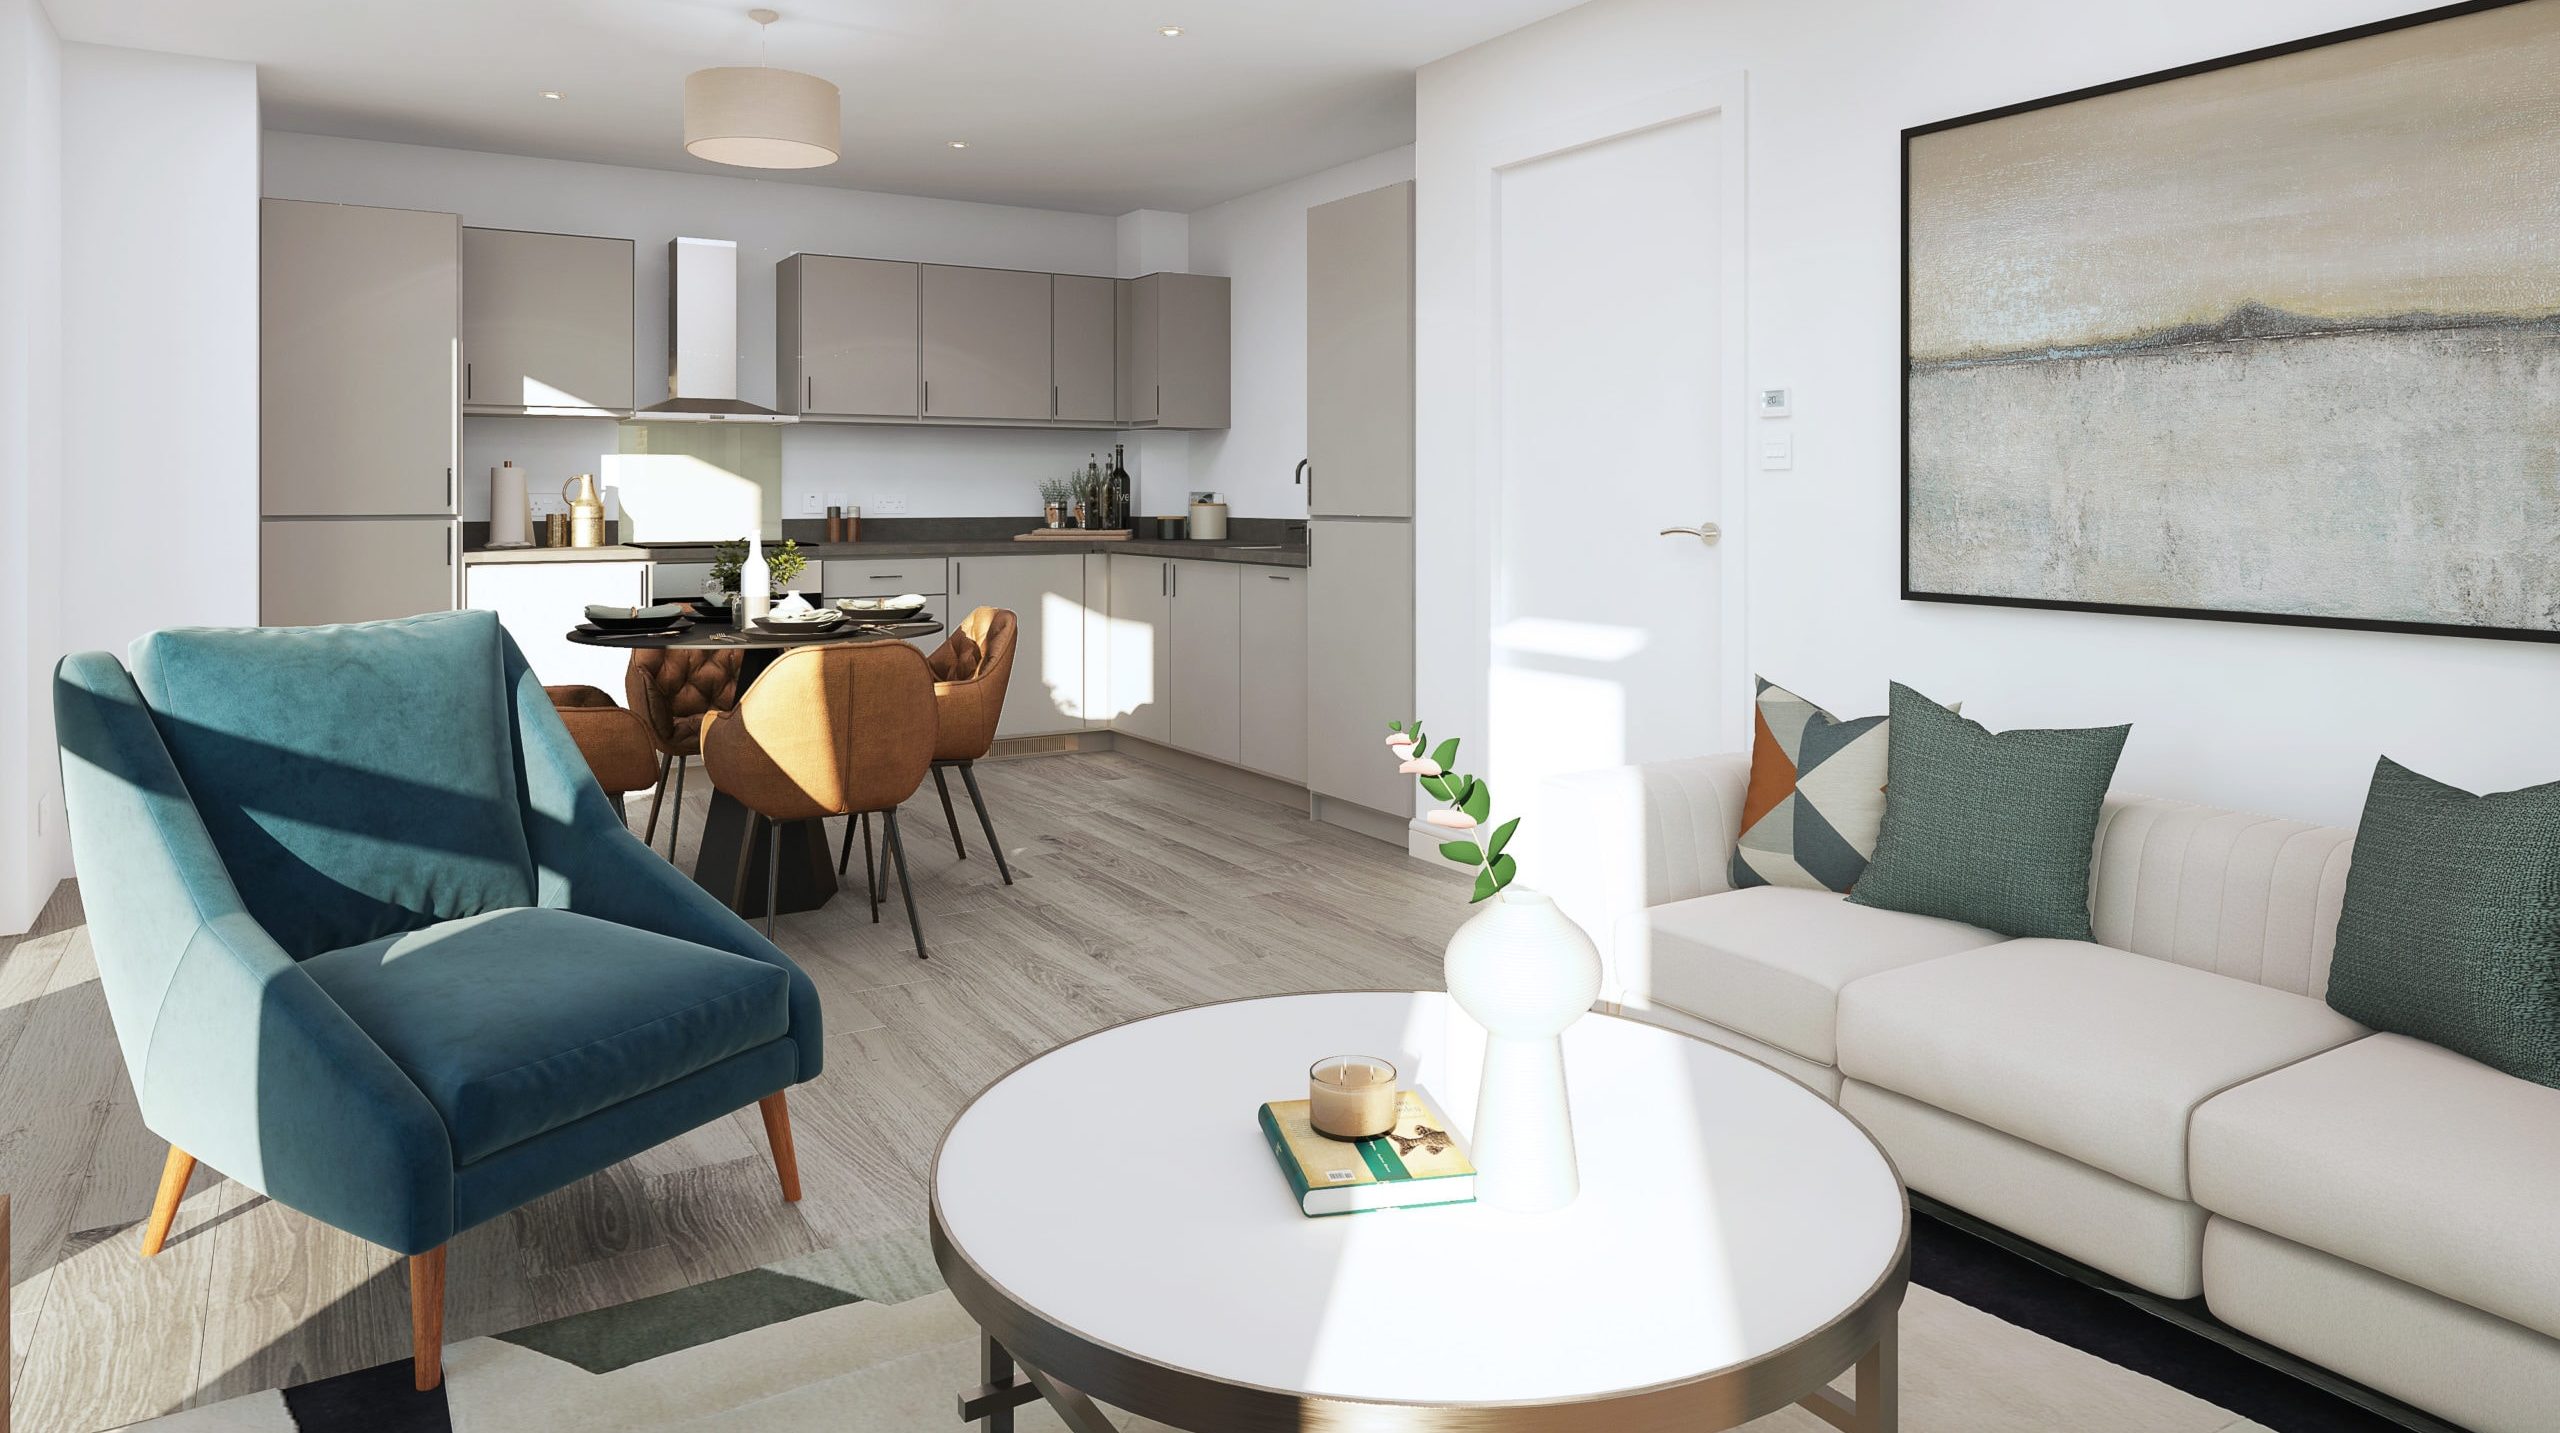 Internal show home photography of Catalyst’s Newman Place - Shared Ownership homes available on Share to Buy